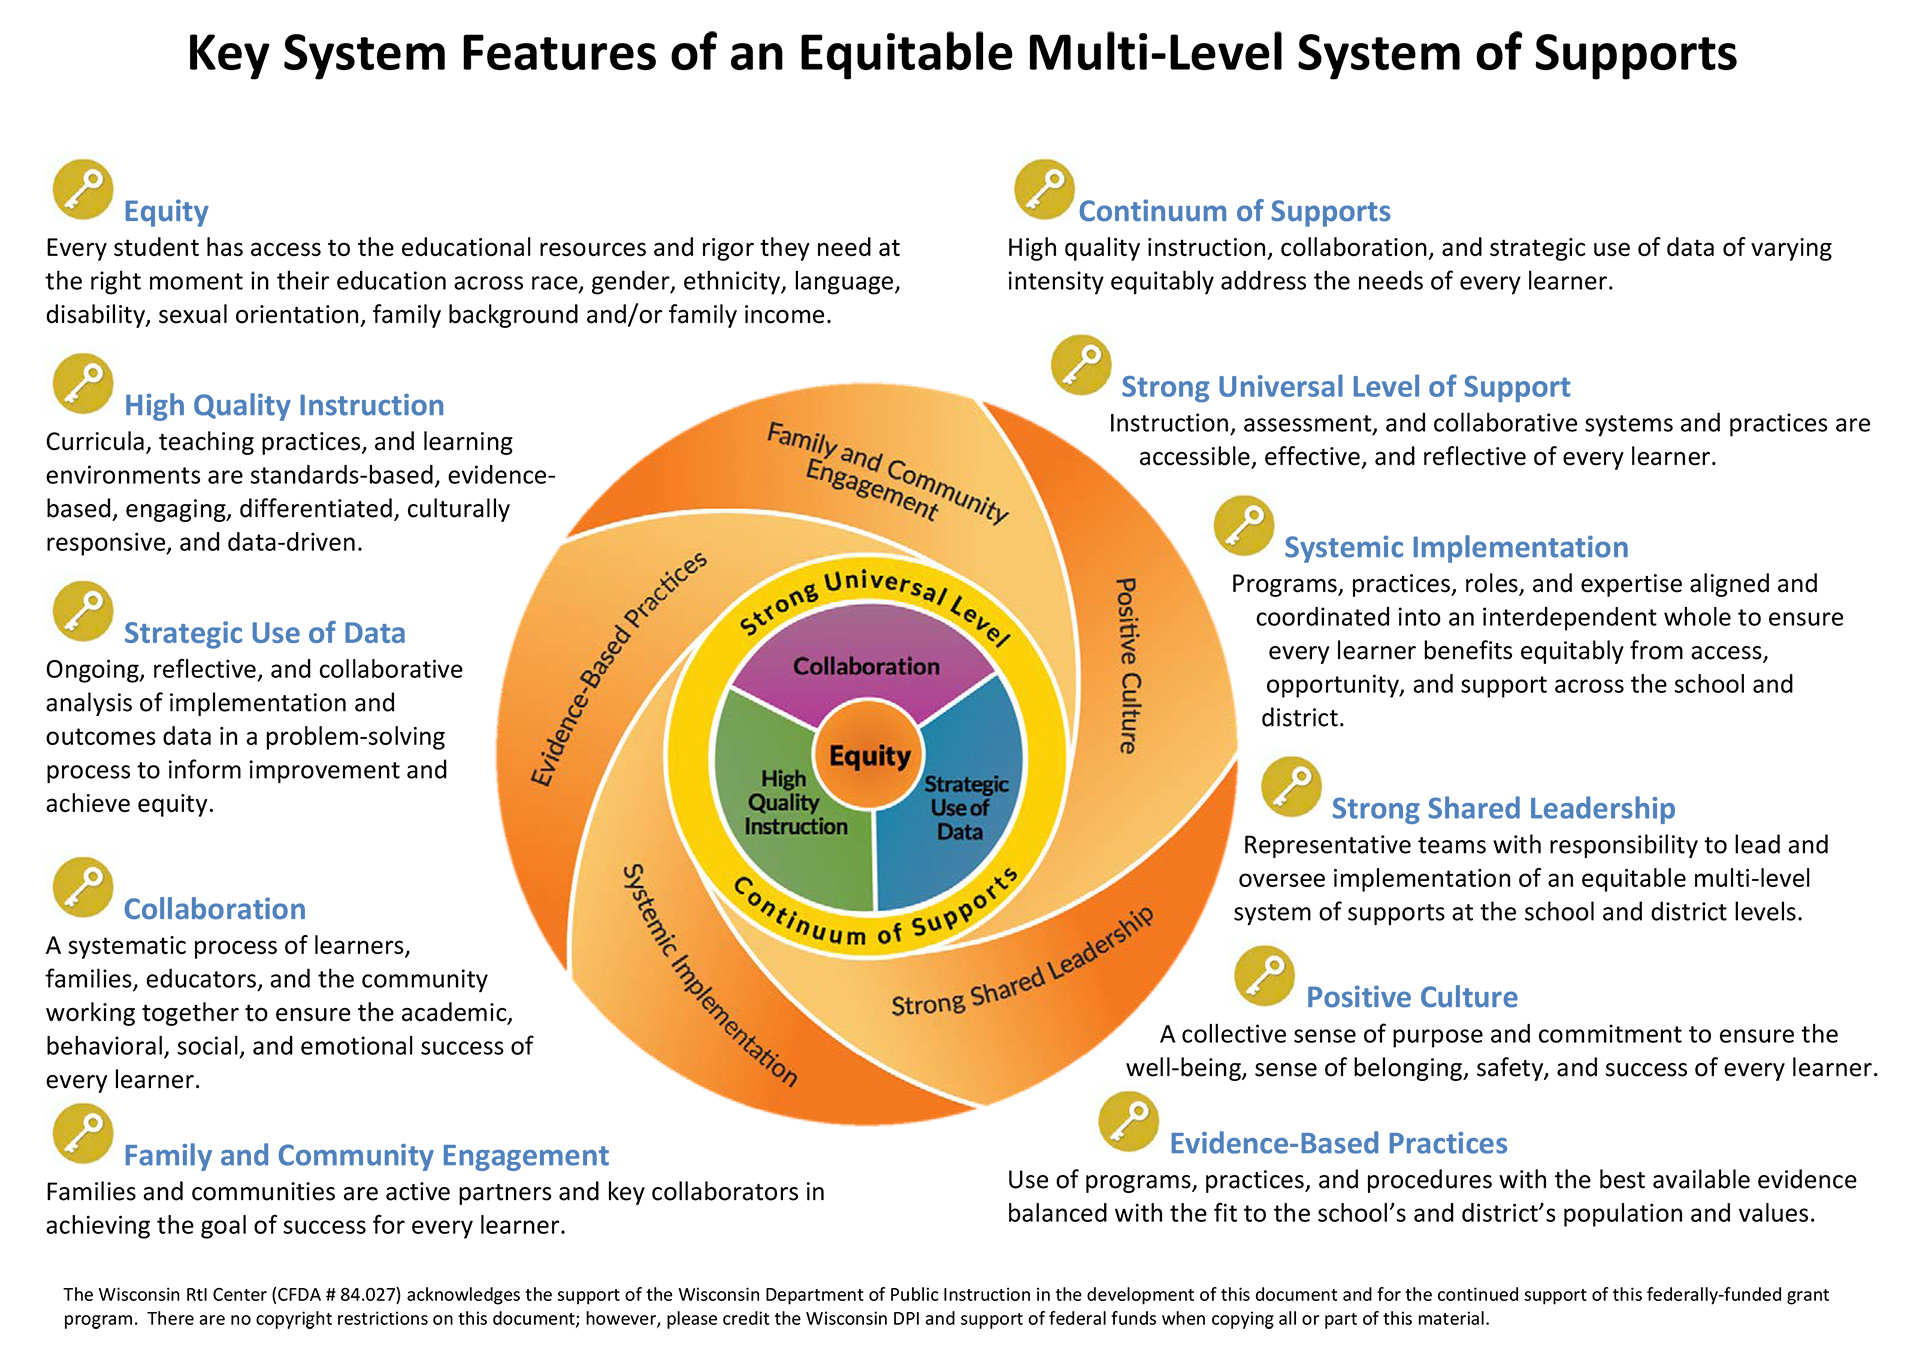 A graphic titles "The Key System Features of an Equitable Multi-Level System of Supports." With 11 key points explaining that process.